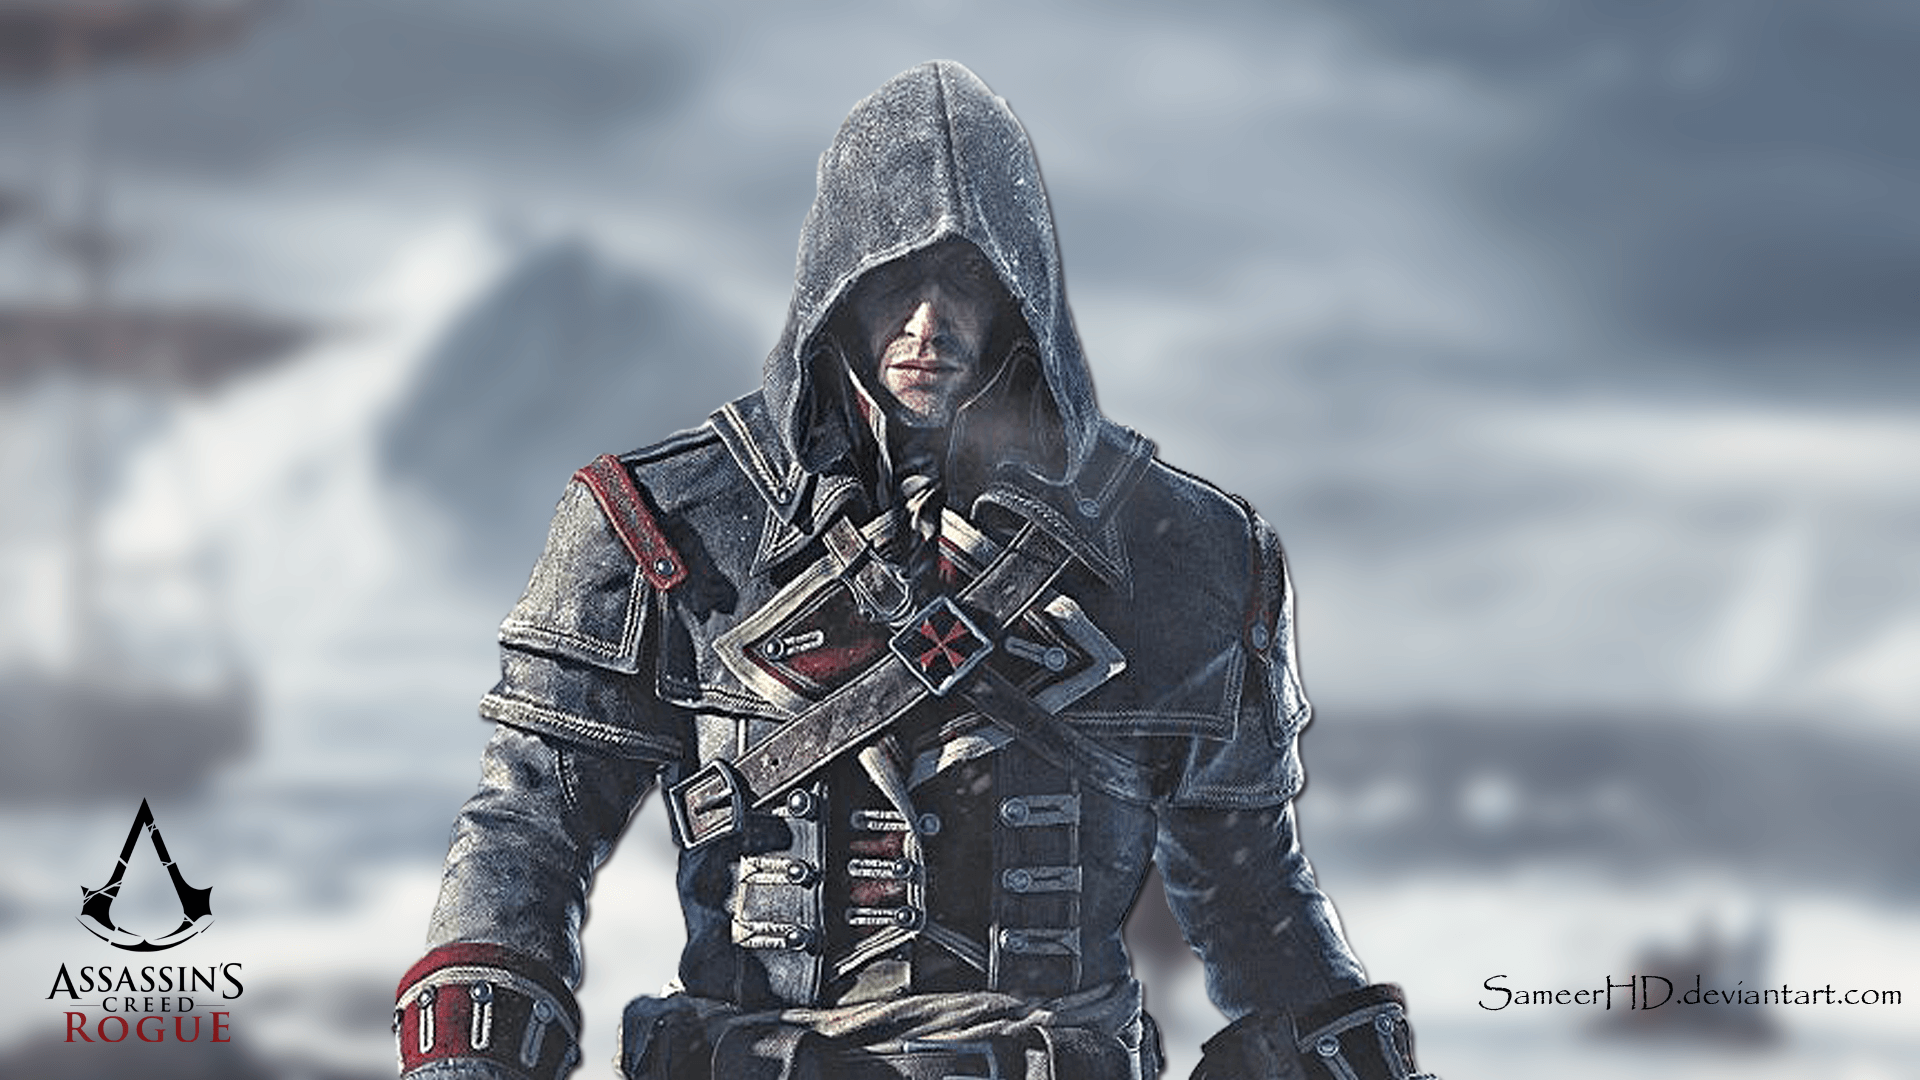 Download Assassins Creed Rogue wallpapers for mobile phone free  Assassins Creed Rogue HD pictures